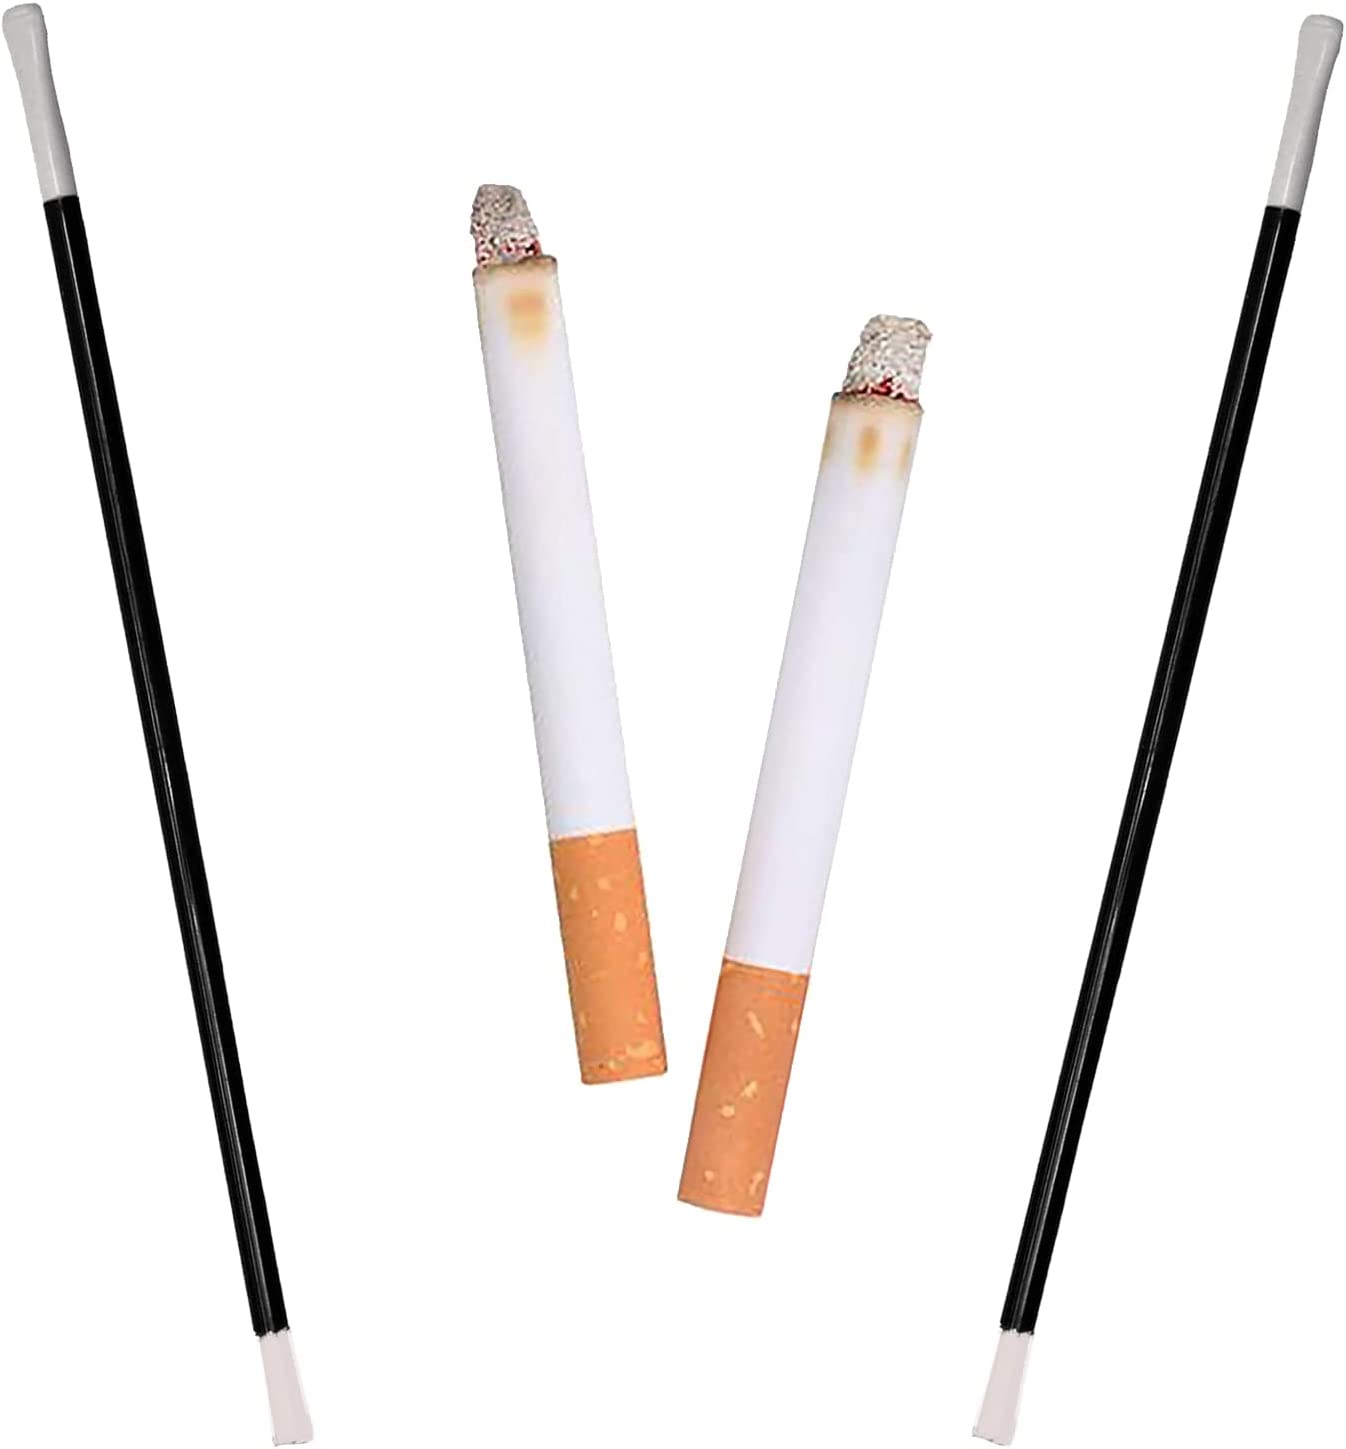 4E's Novelty 2 Long Cigarette Holders & 2 Fake Puff Cigarettes with Smoke for Halloween Gatsby Accessories for Women, Roaring 1920s Flapper Photo Prop, Pranks